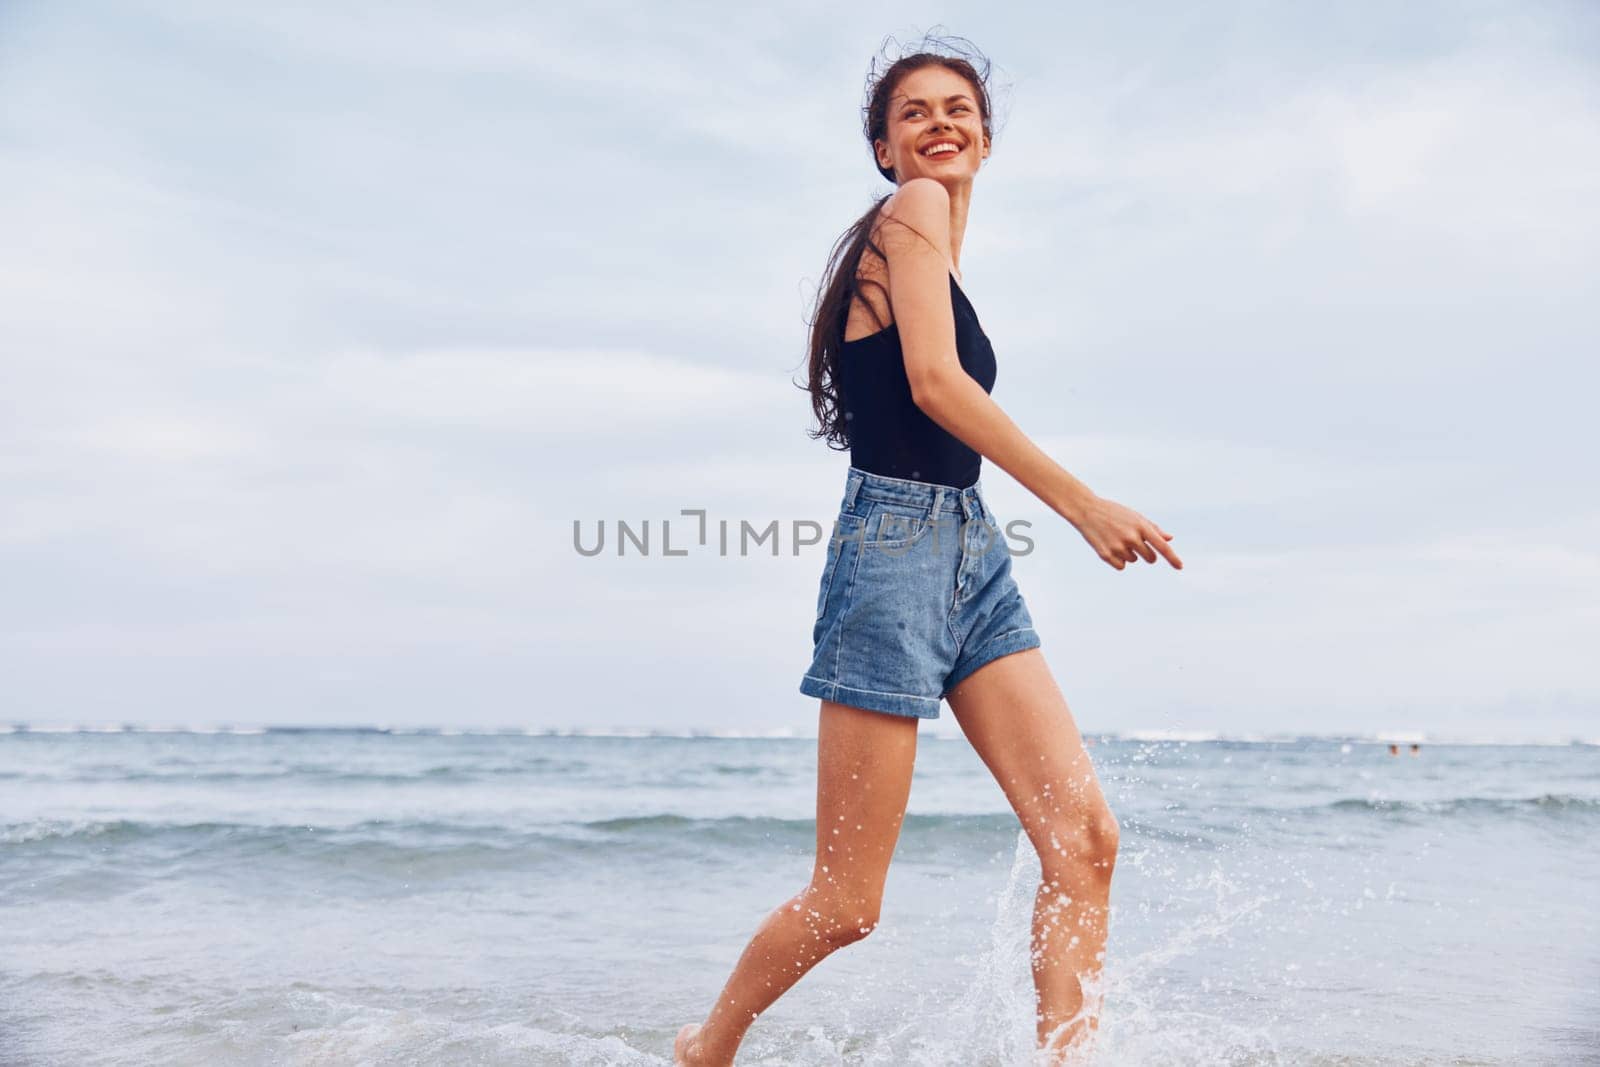 sunset woman running young lifestyle sea summer beach smile sexy travel by SHOTPRIME